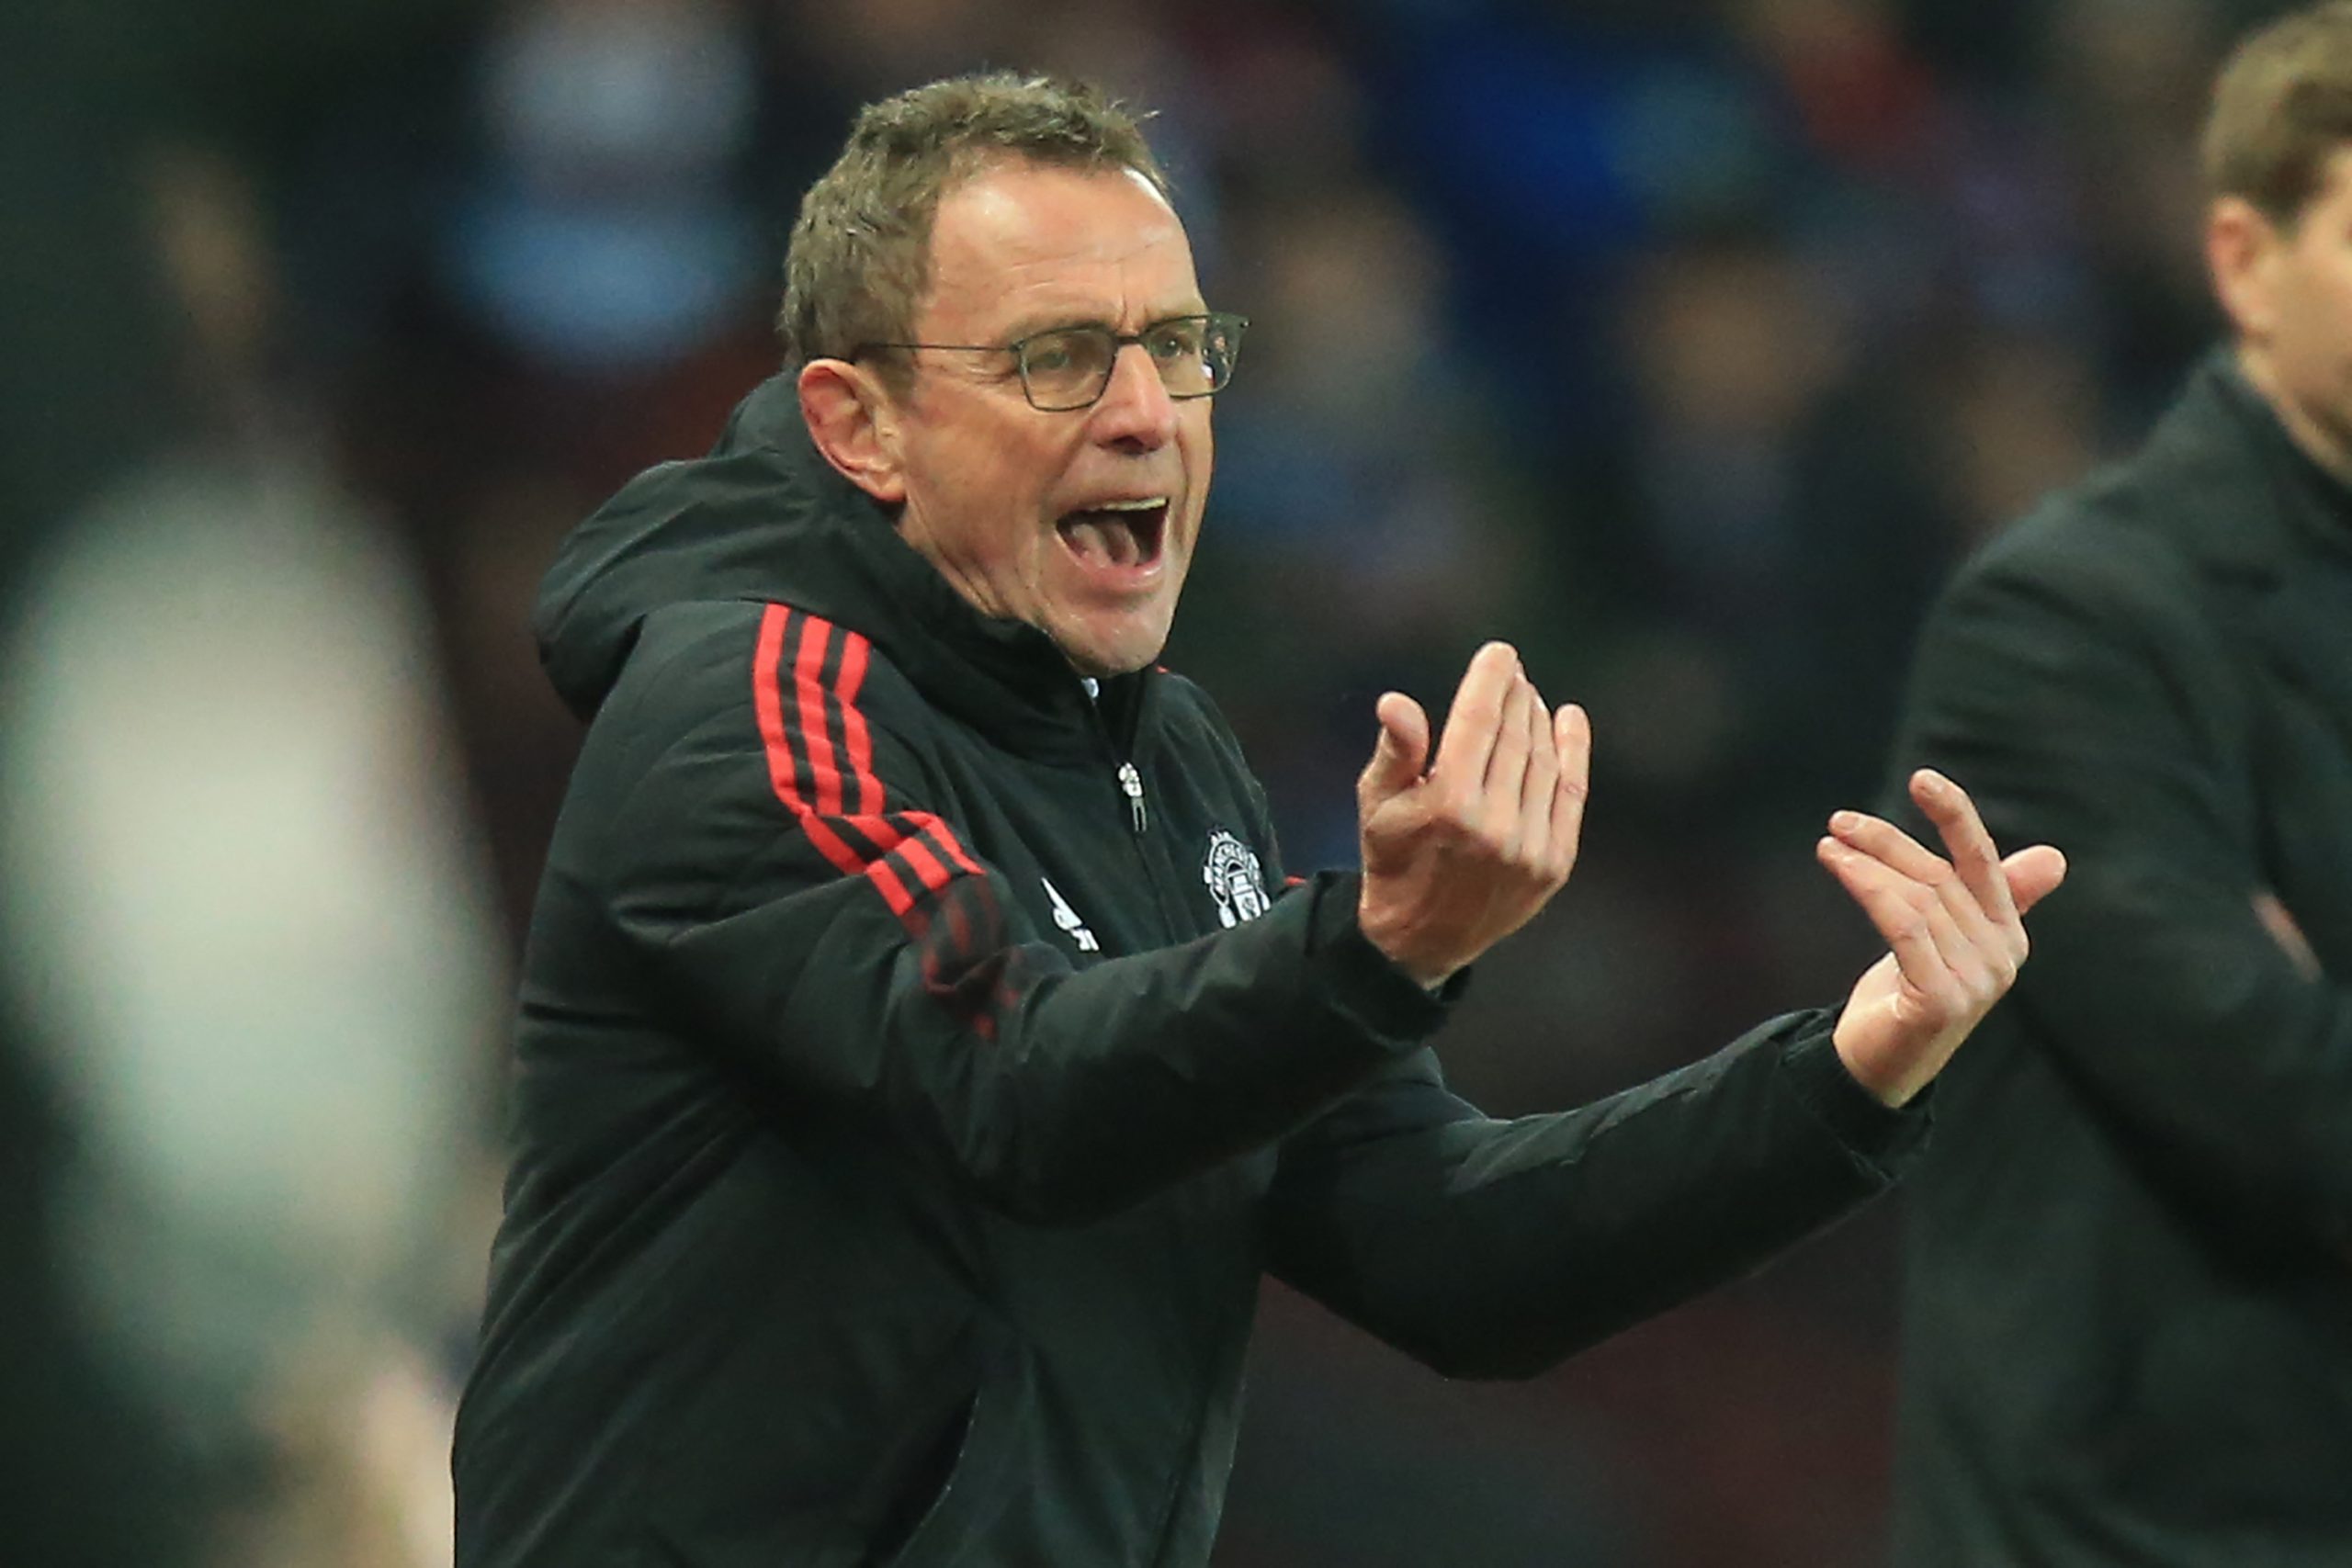 Ralf Rangnick is the interim manager at Manchester United.